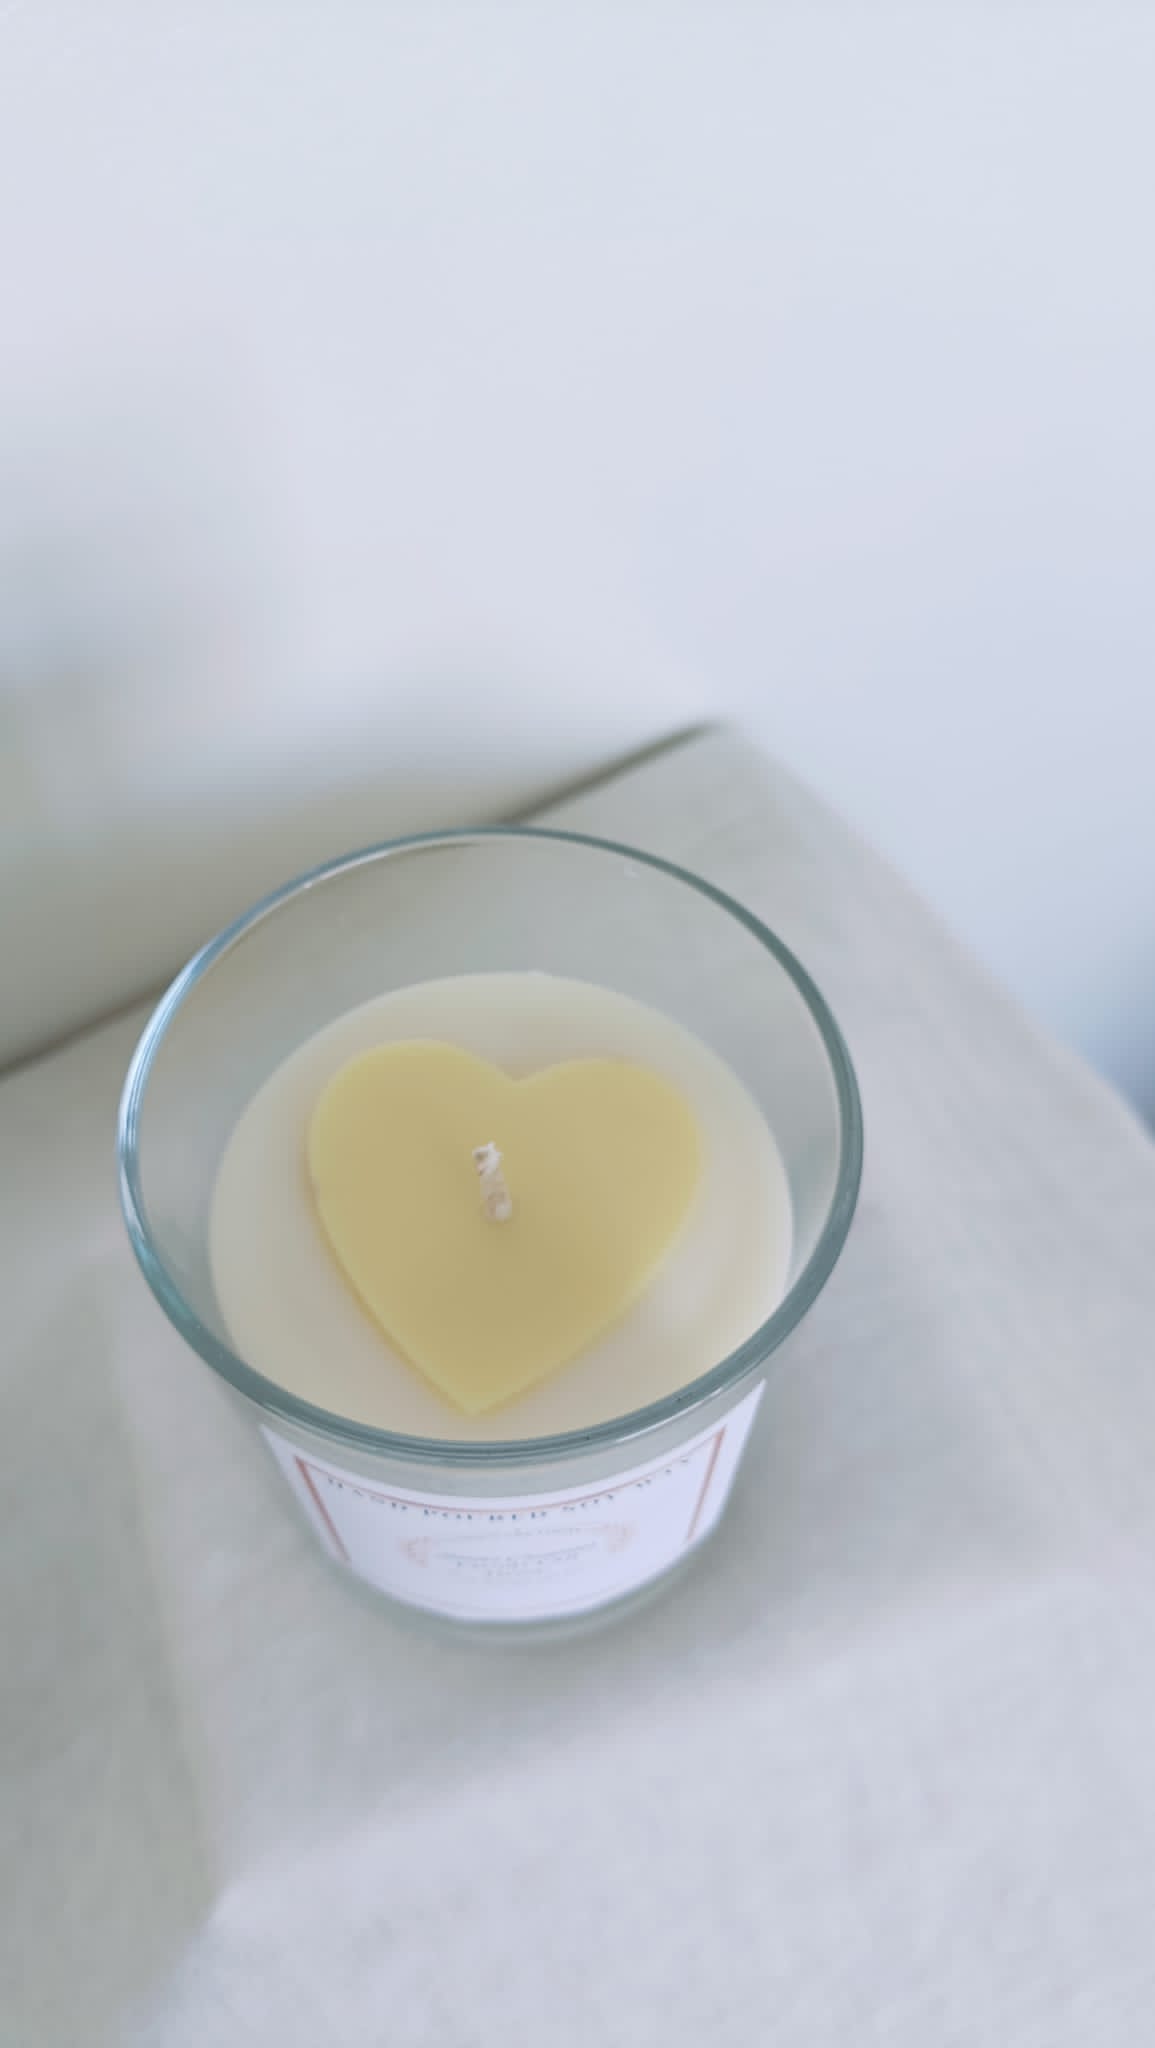 30cl Heart Scented Soy Wax Glass Jar Candle (Various Scents)